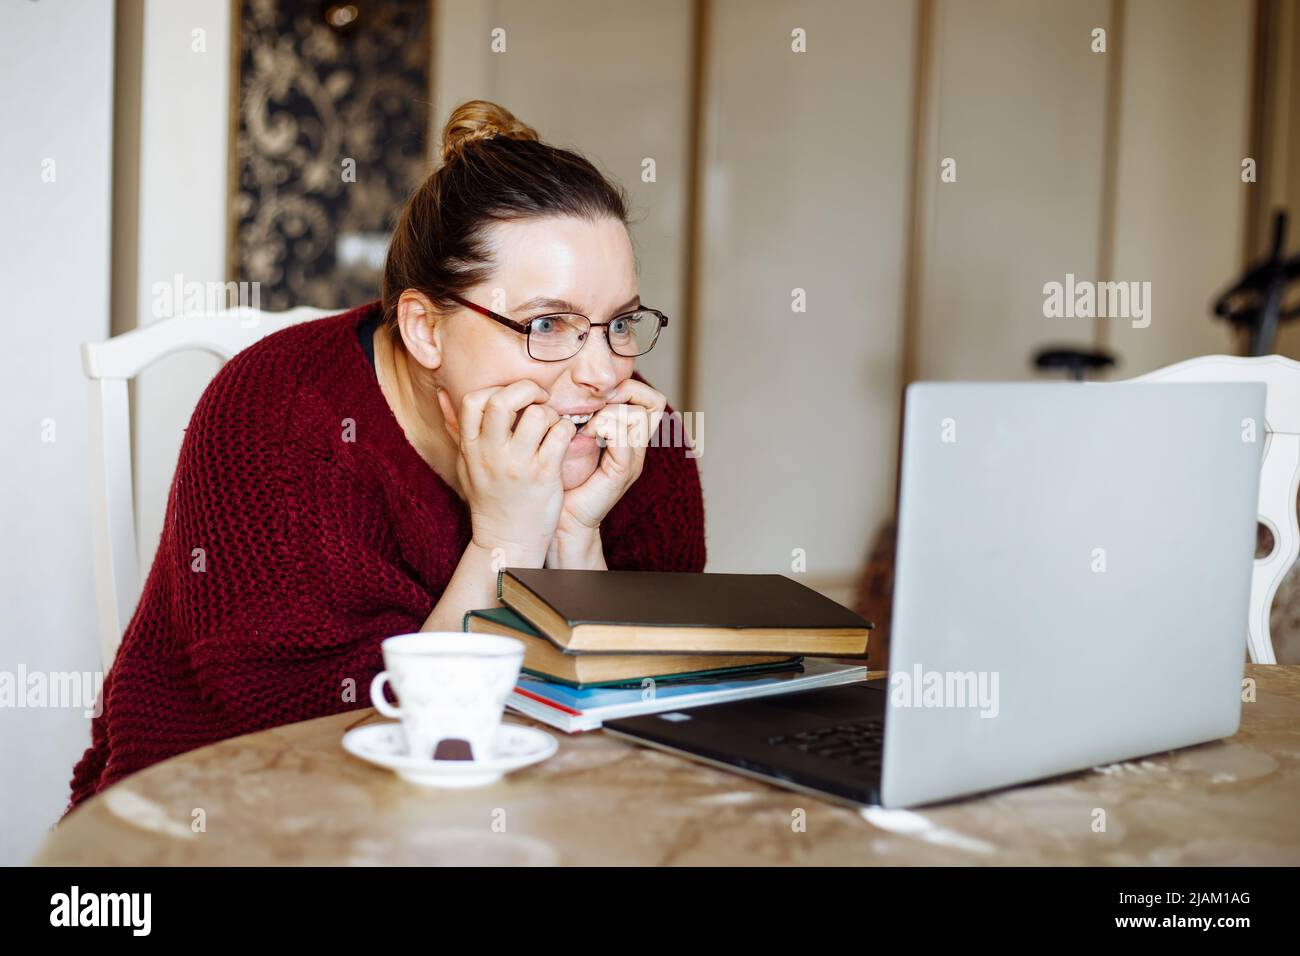 Tired and angry woman using laptop, online deals, remote job at home. Slow speed internet, downloading. Work problems Stock Photo